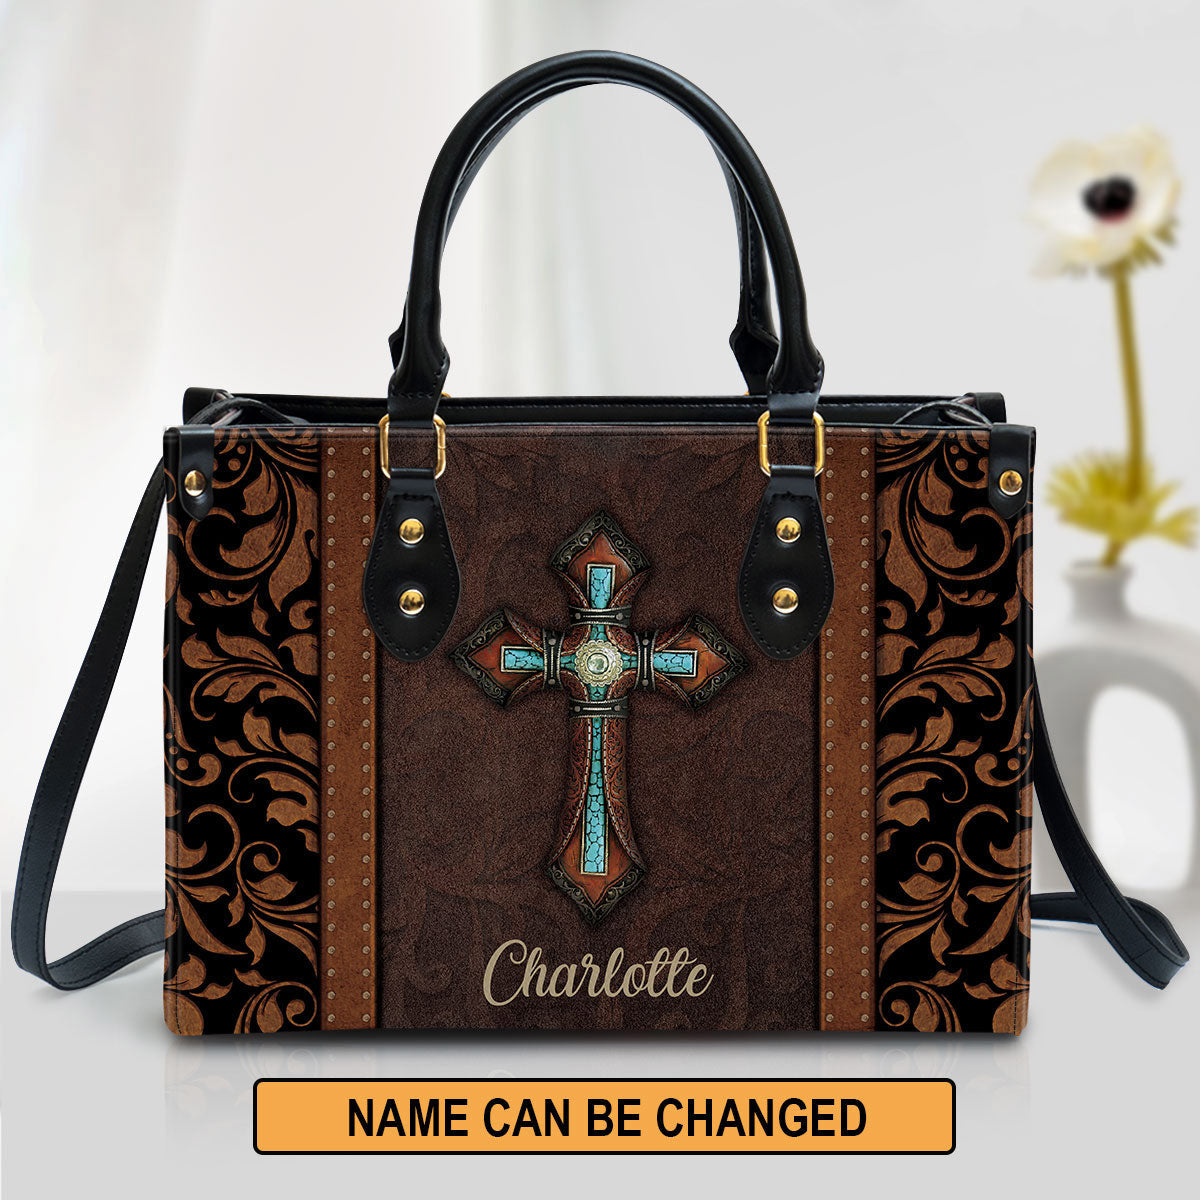 Unique Personalized Cross Leather Handbag With Handle Christ Gifts For Religious Women